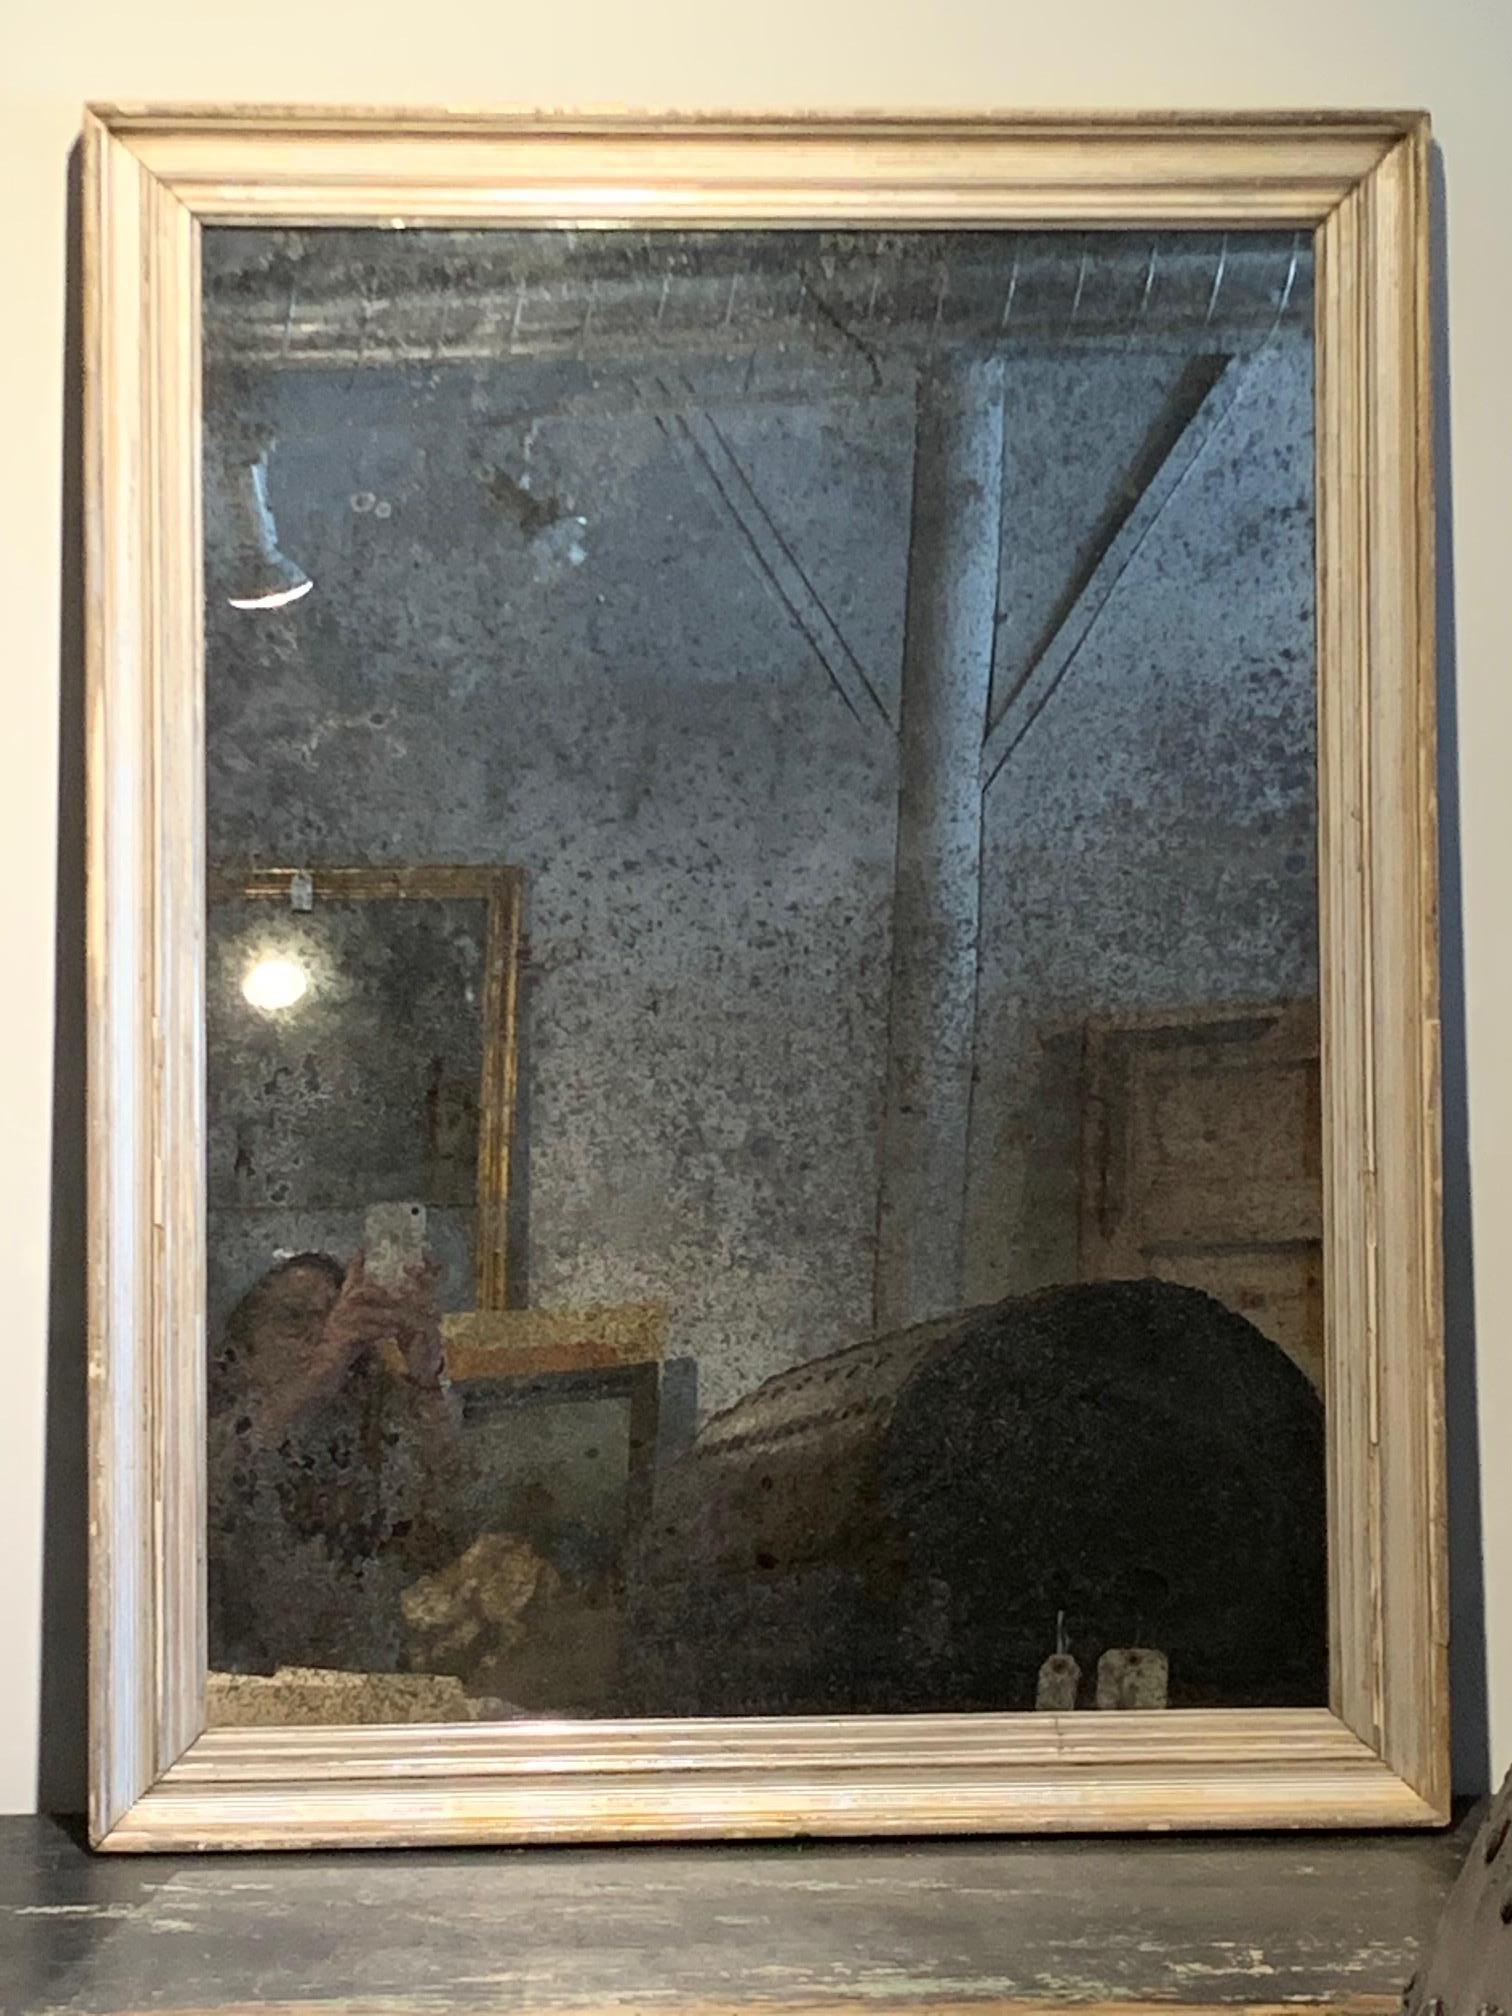 A very lovely 19th century silver giltwood frame now as a mirror. The glass is nicely crazed. To hang either horizontally or vertically. Wonderful size for a powder room or a bathroom, or as an over mantel mirror. Beautiful patina.